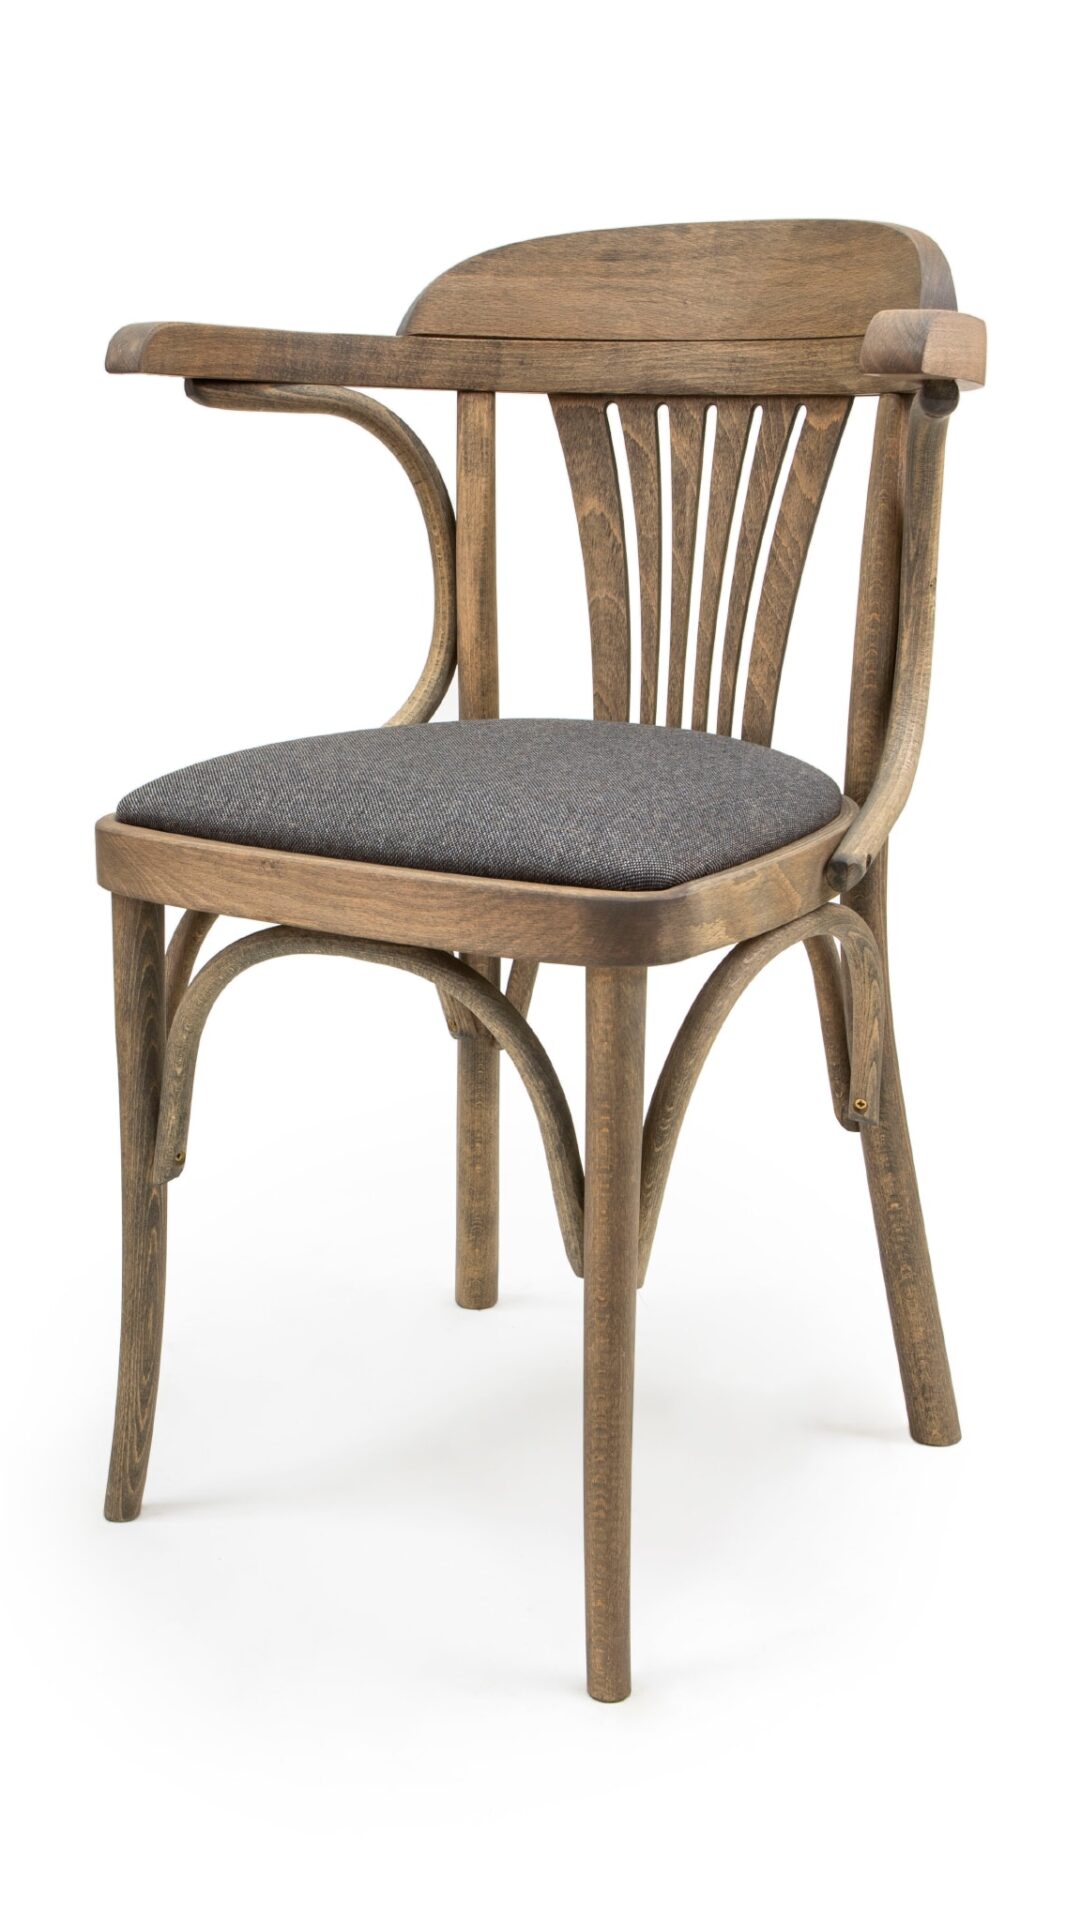 Bentwood Chair with Armrests from Beech - 1337AP